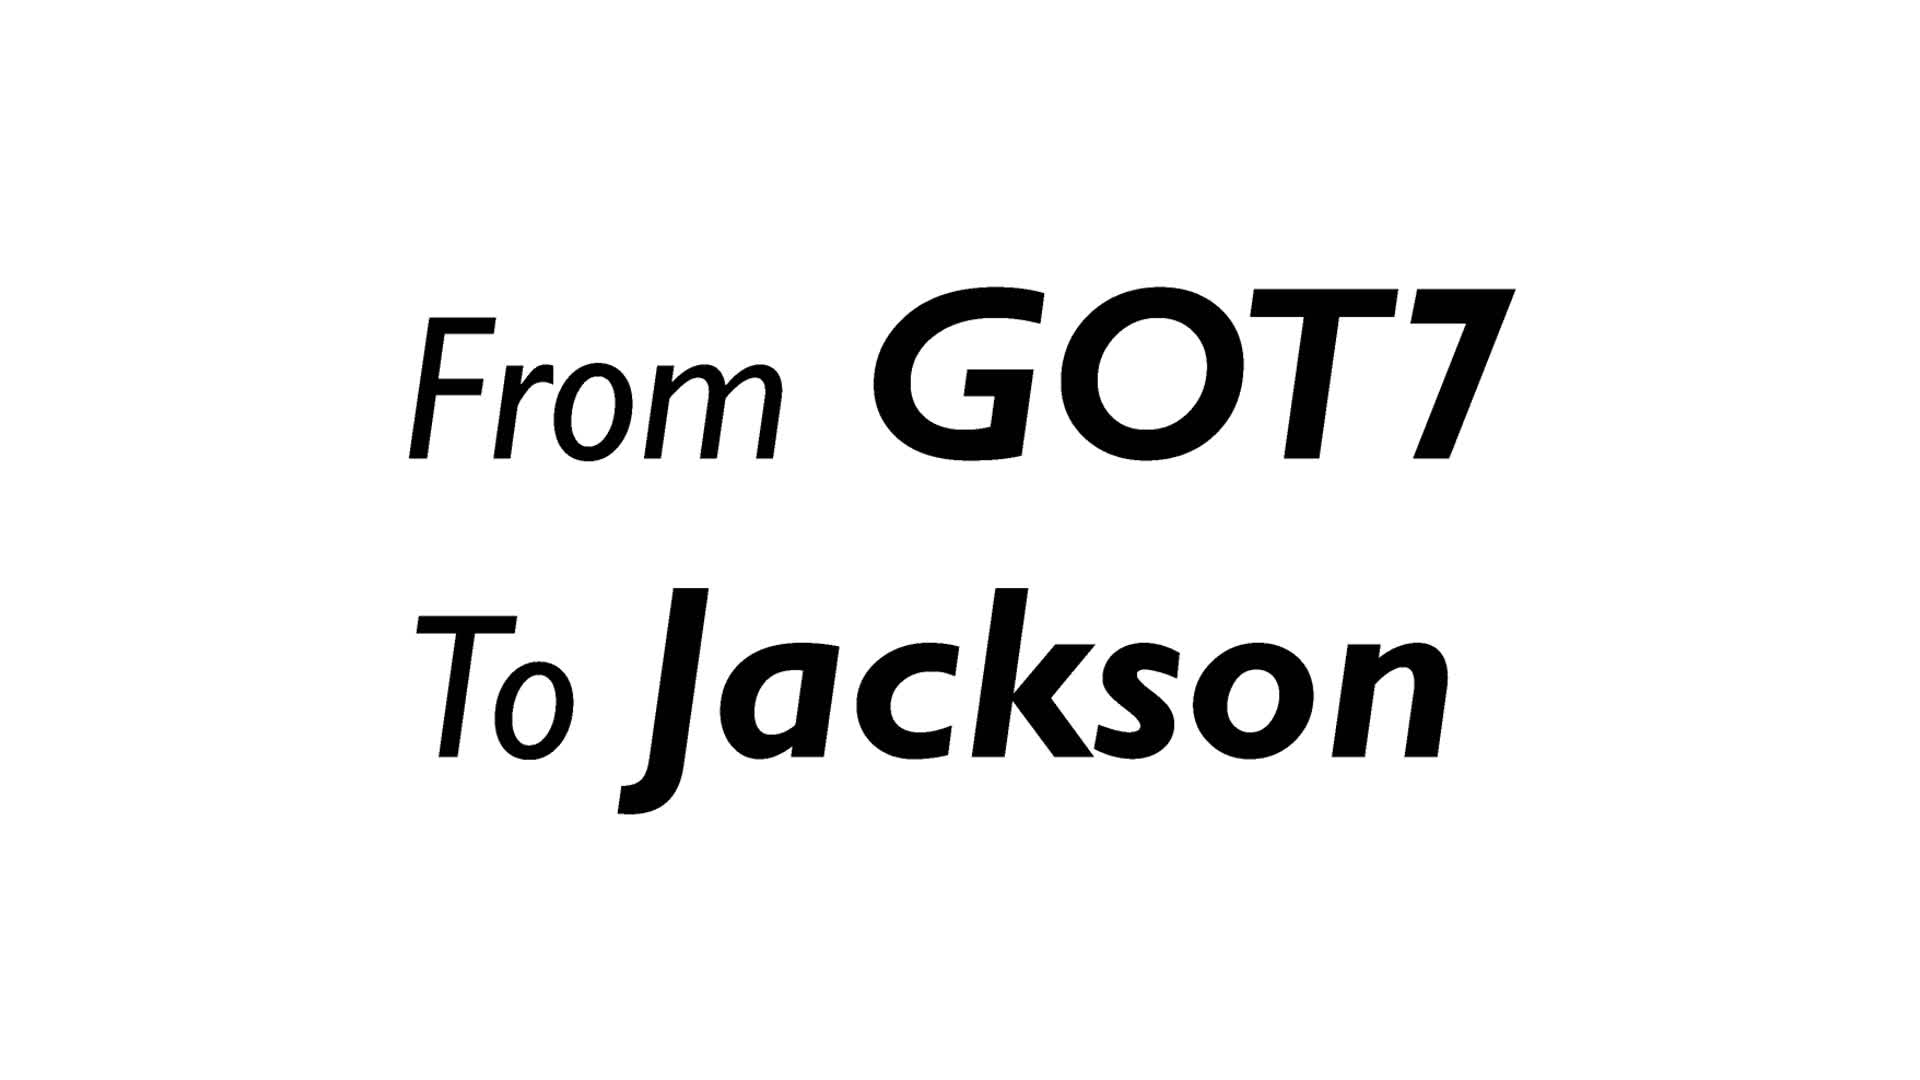 For Jackson, From 진심친구